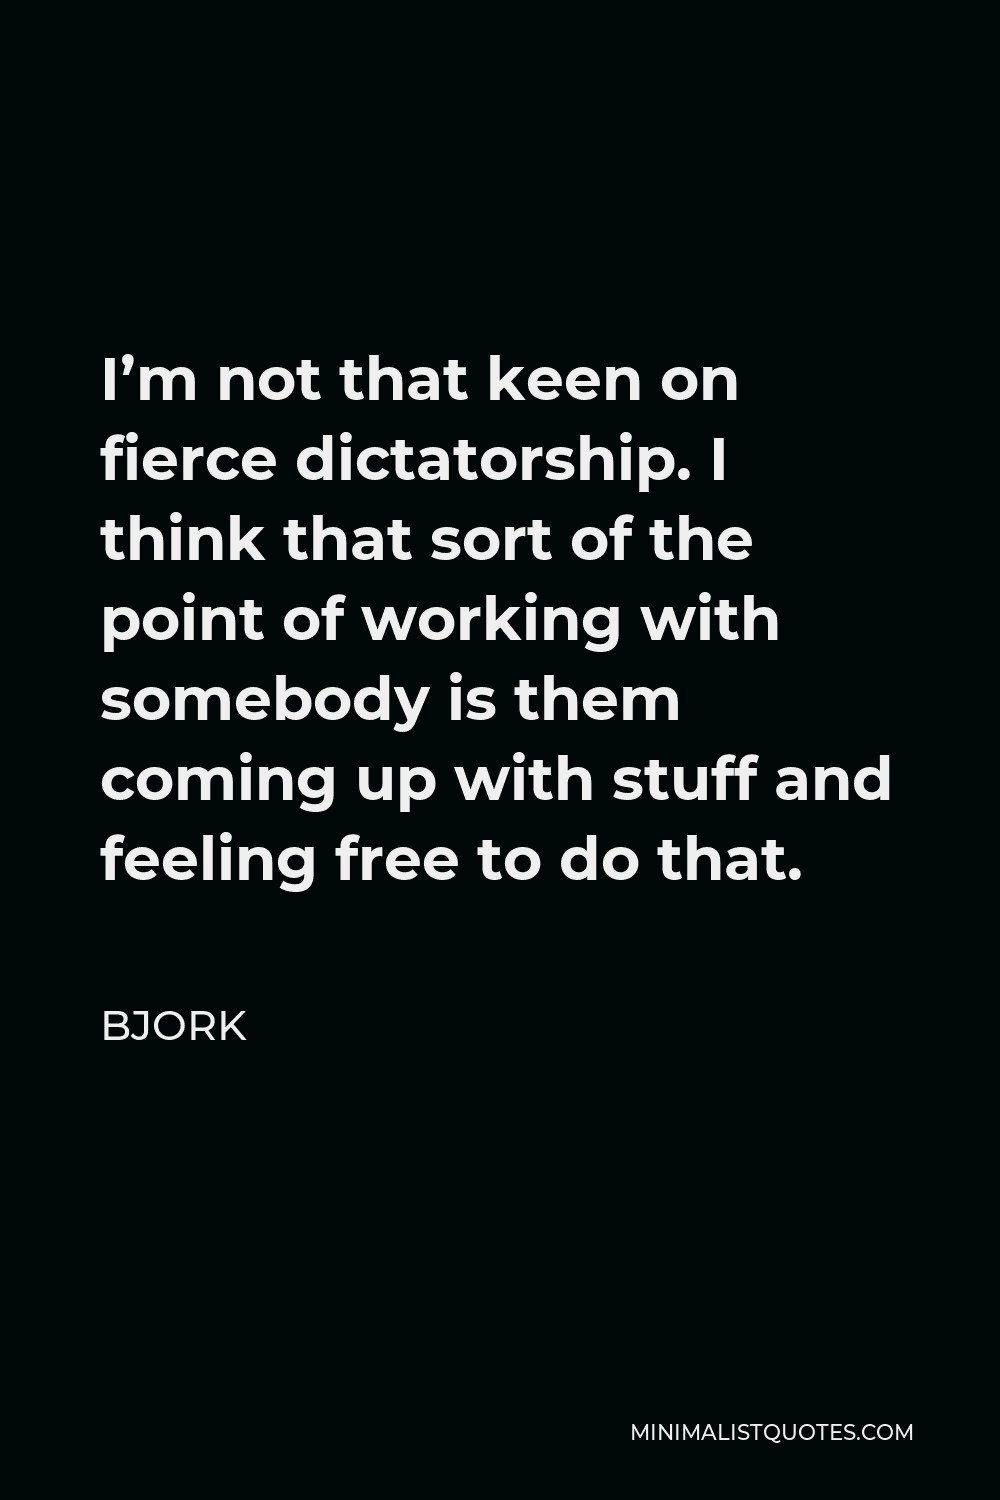 Bjork Quote - I’m not that keen on fierce dictatorship. I think that sort of the point of working with somebody is them coming up with stuff and feeling free to do that.